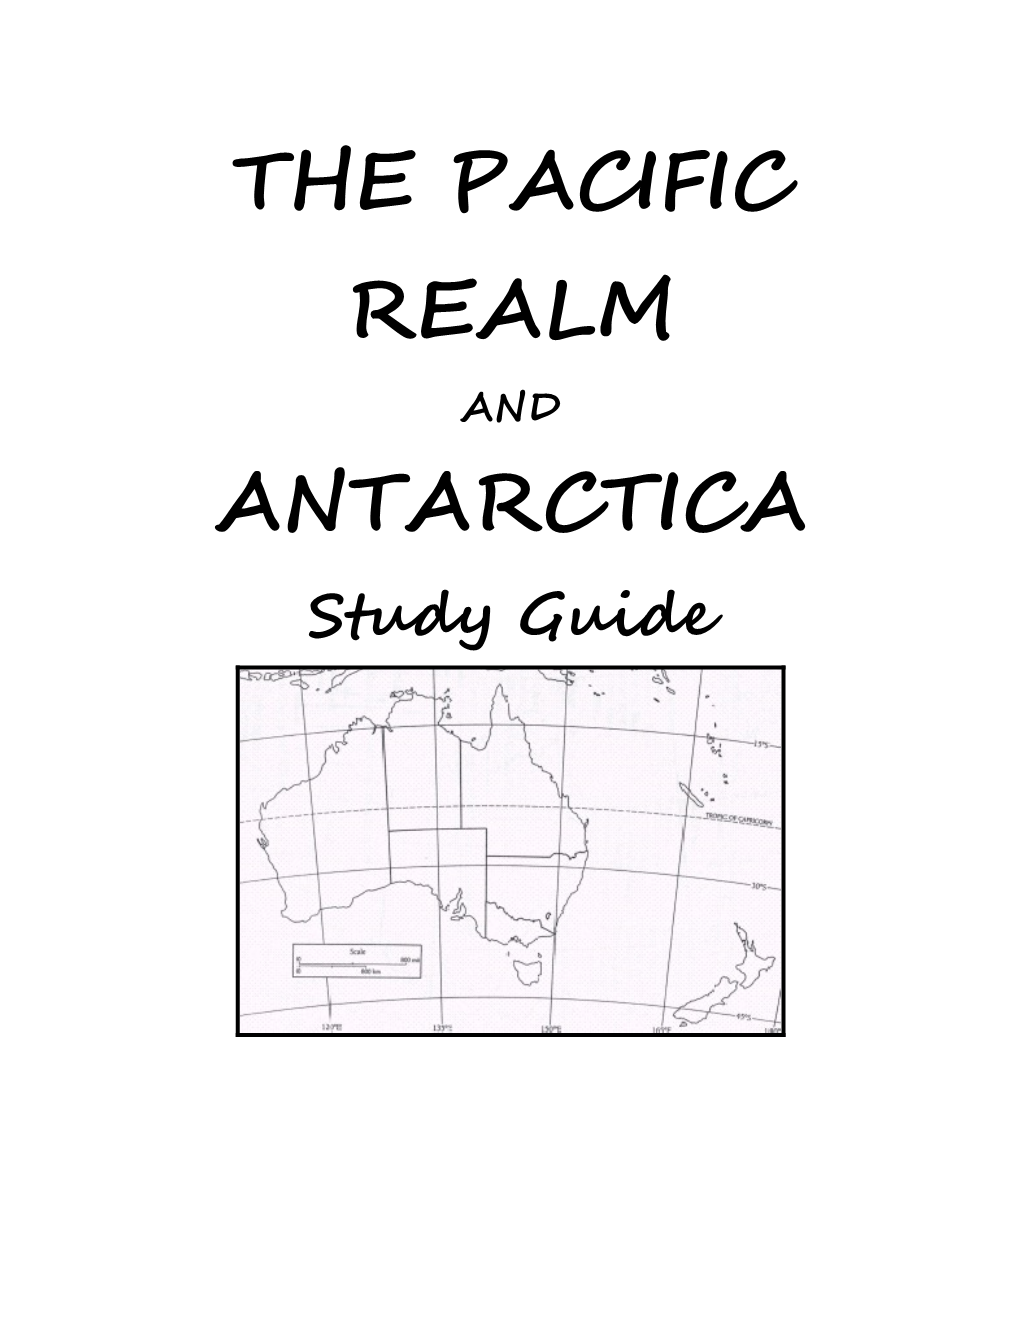 The Pacific Realm